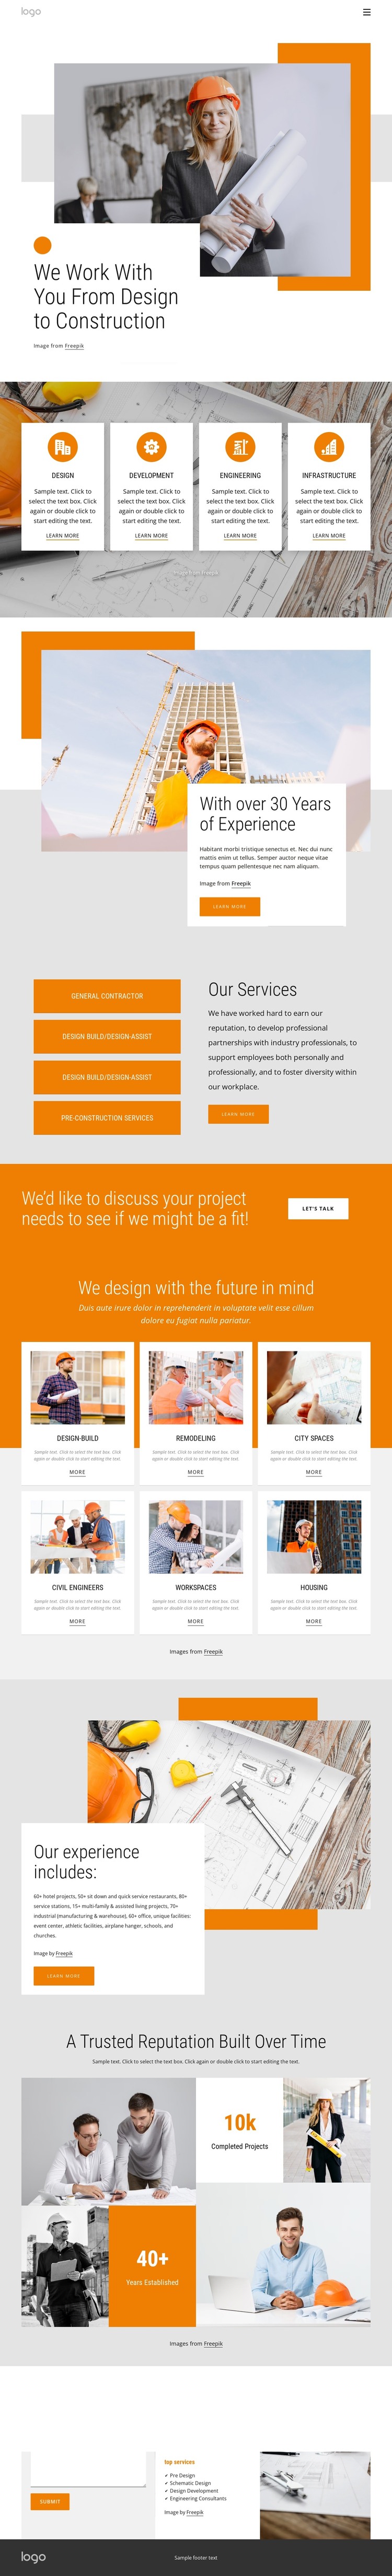 From design to construction Web Design